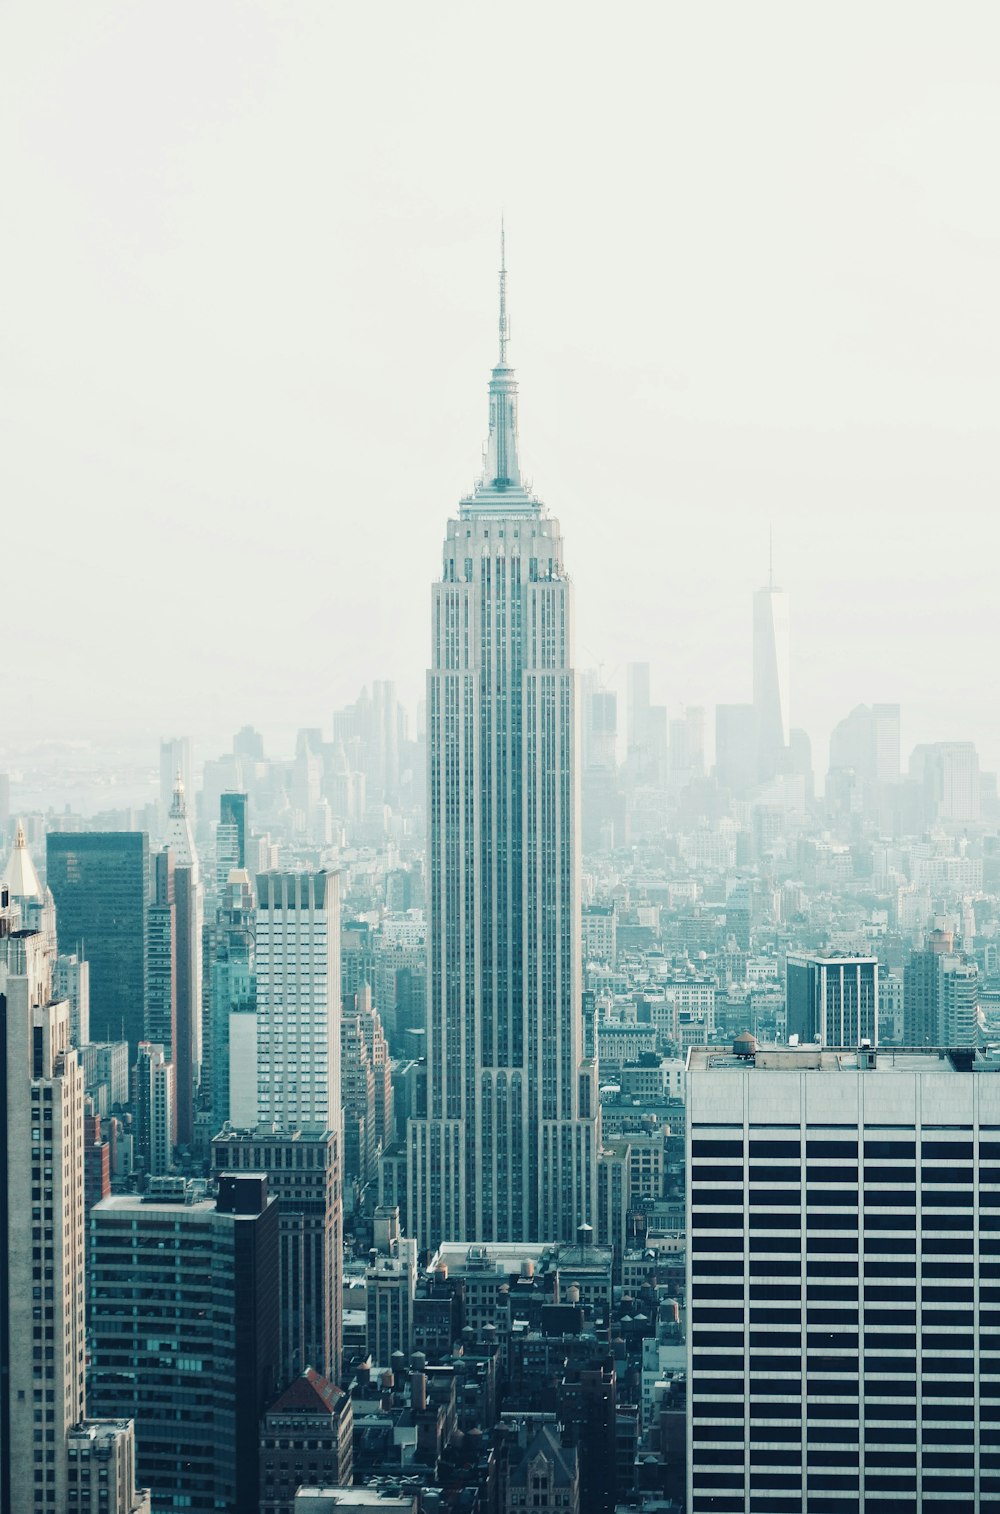 Empire State Building, New York during daytime